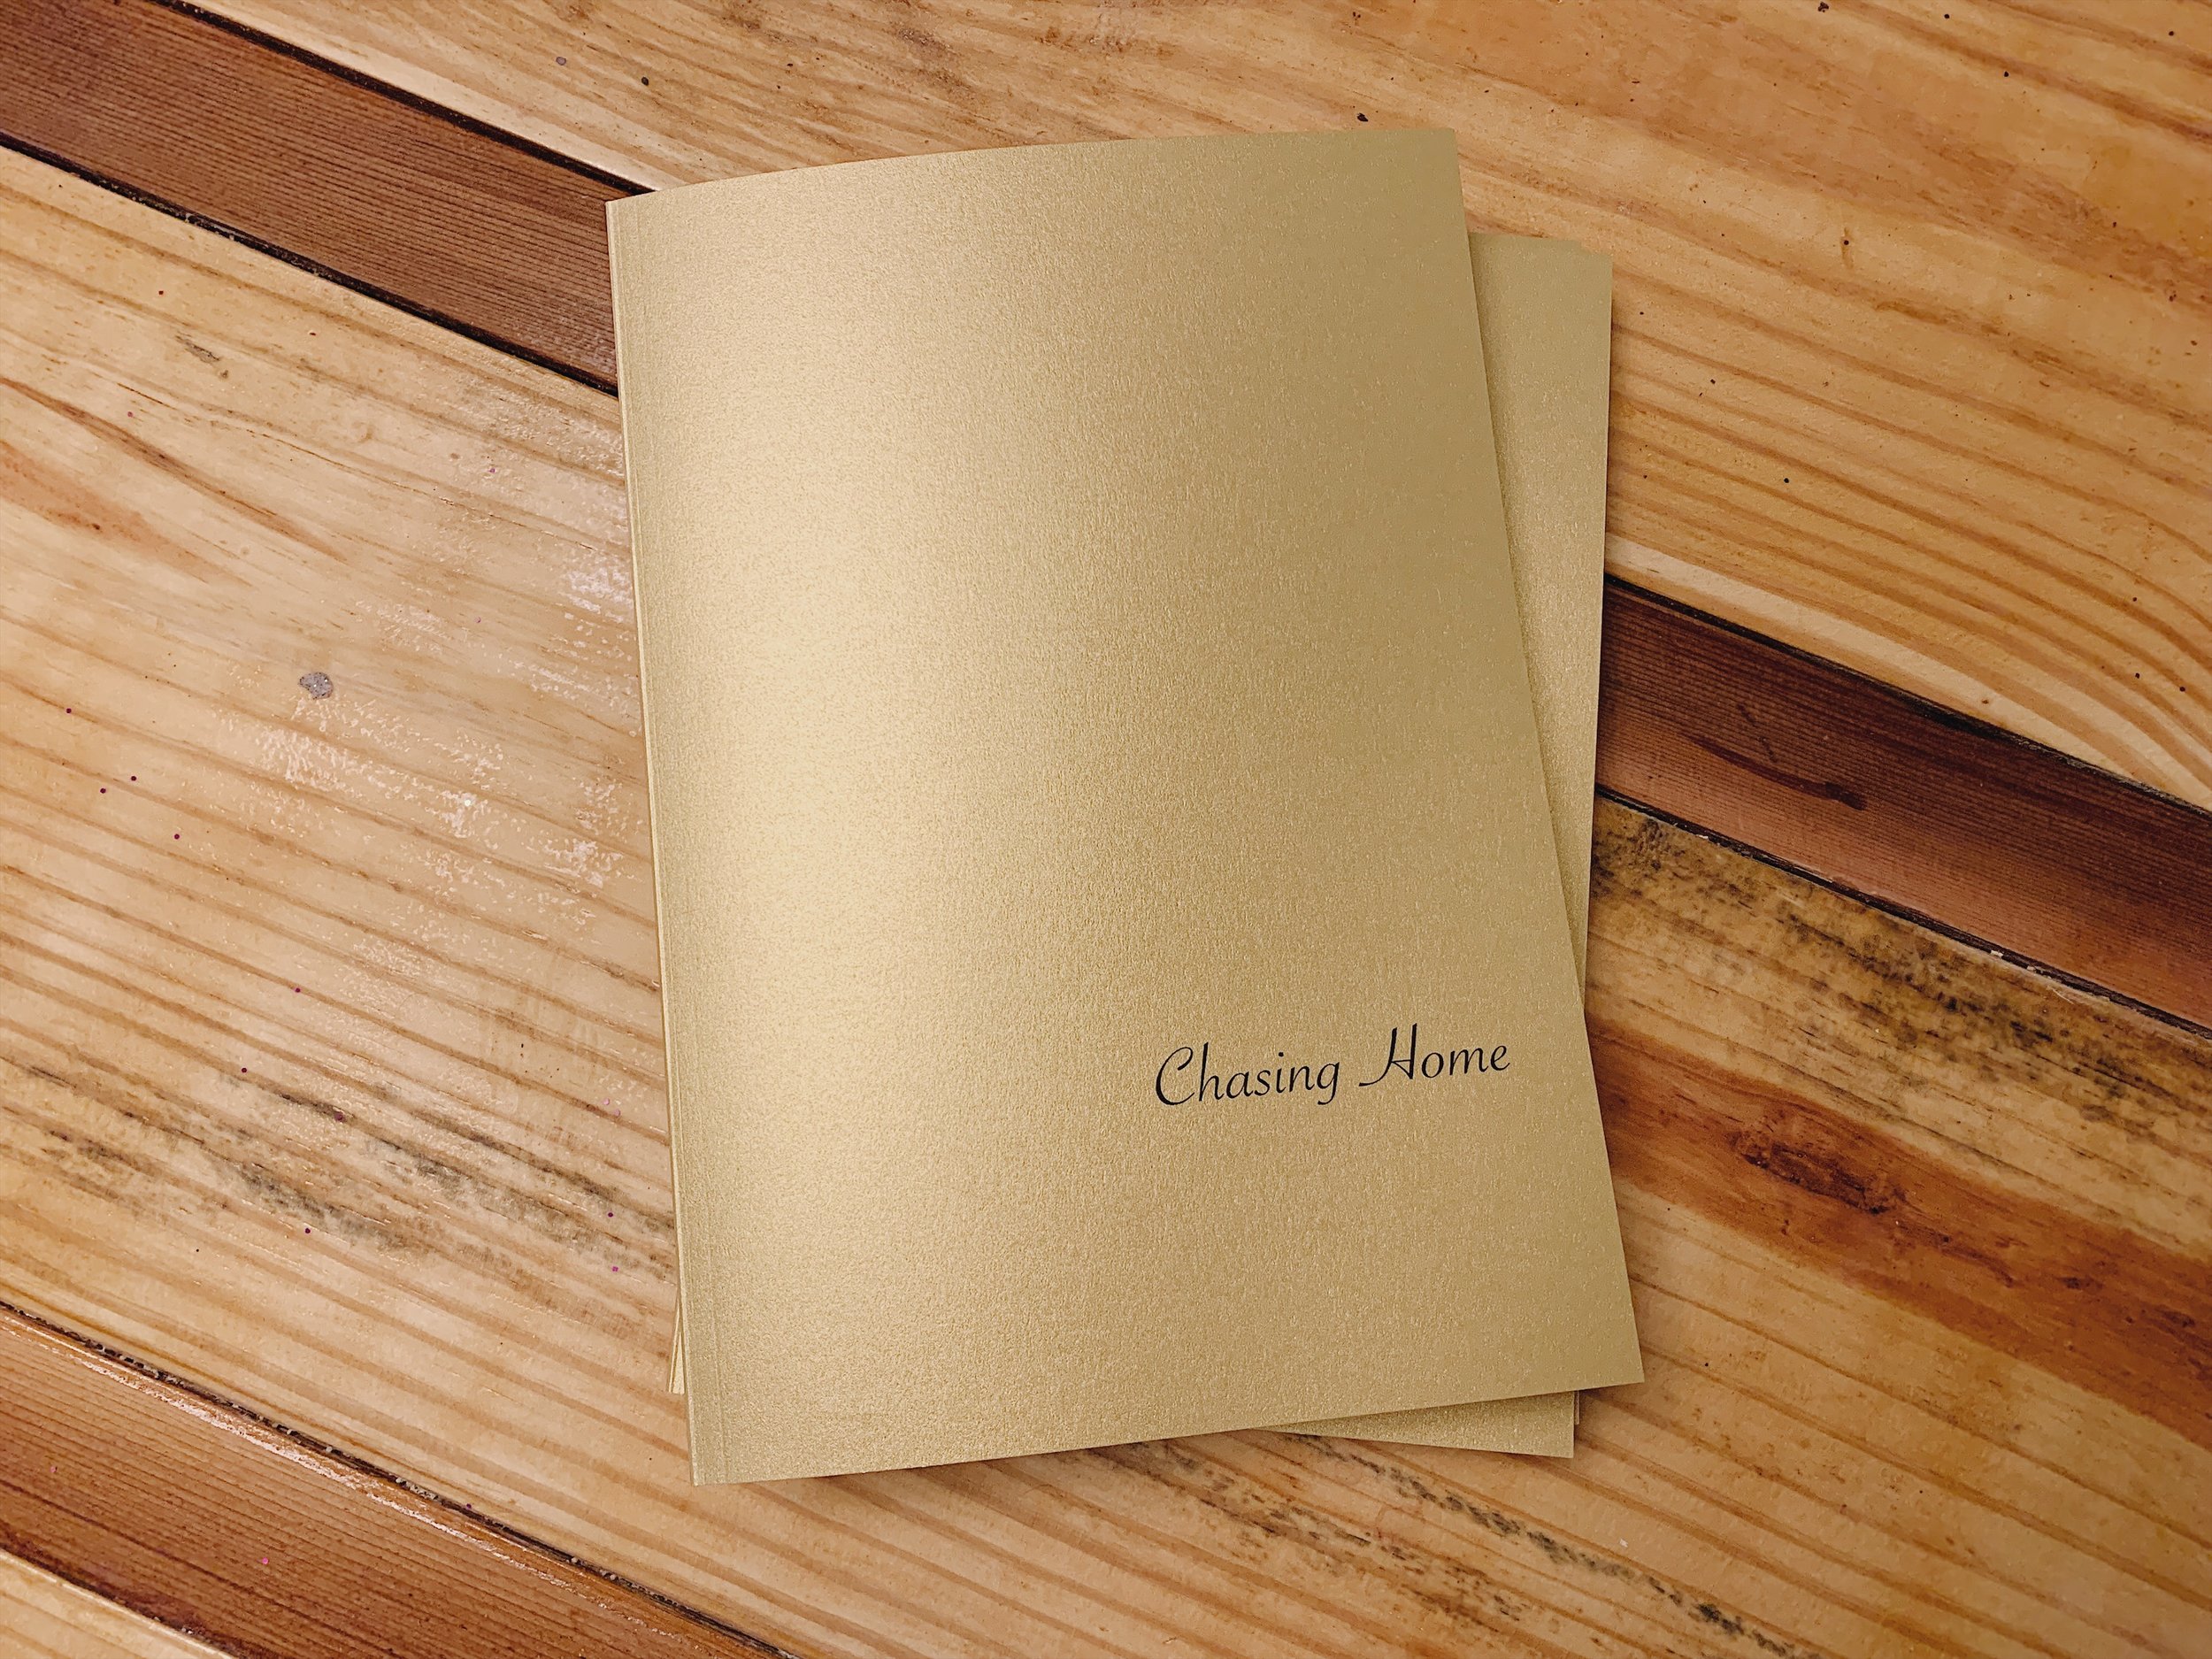   Chasing Home Book, 7x10 Softcover, 48 pg.  